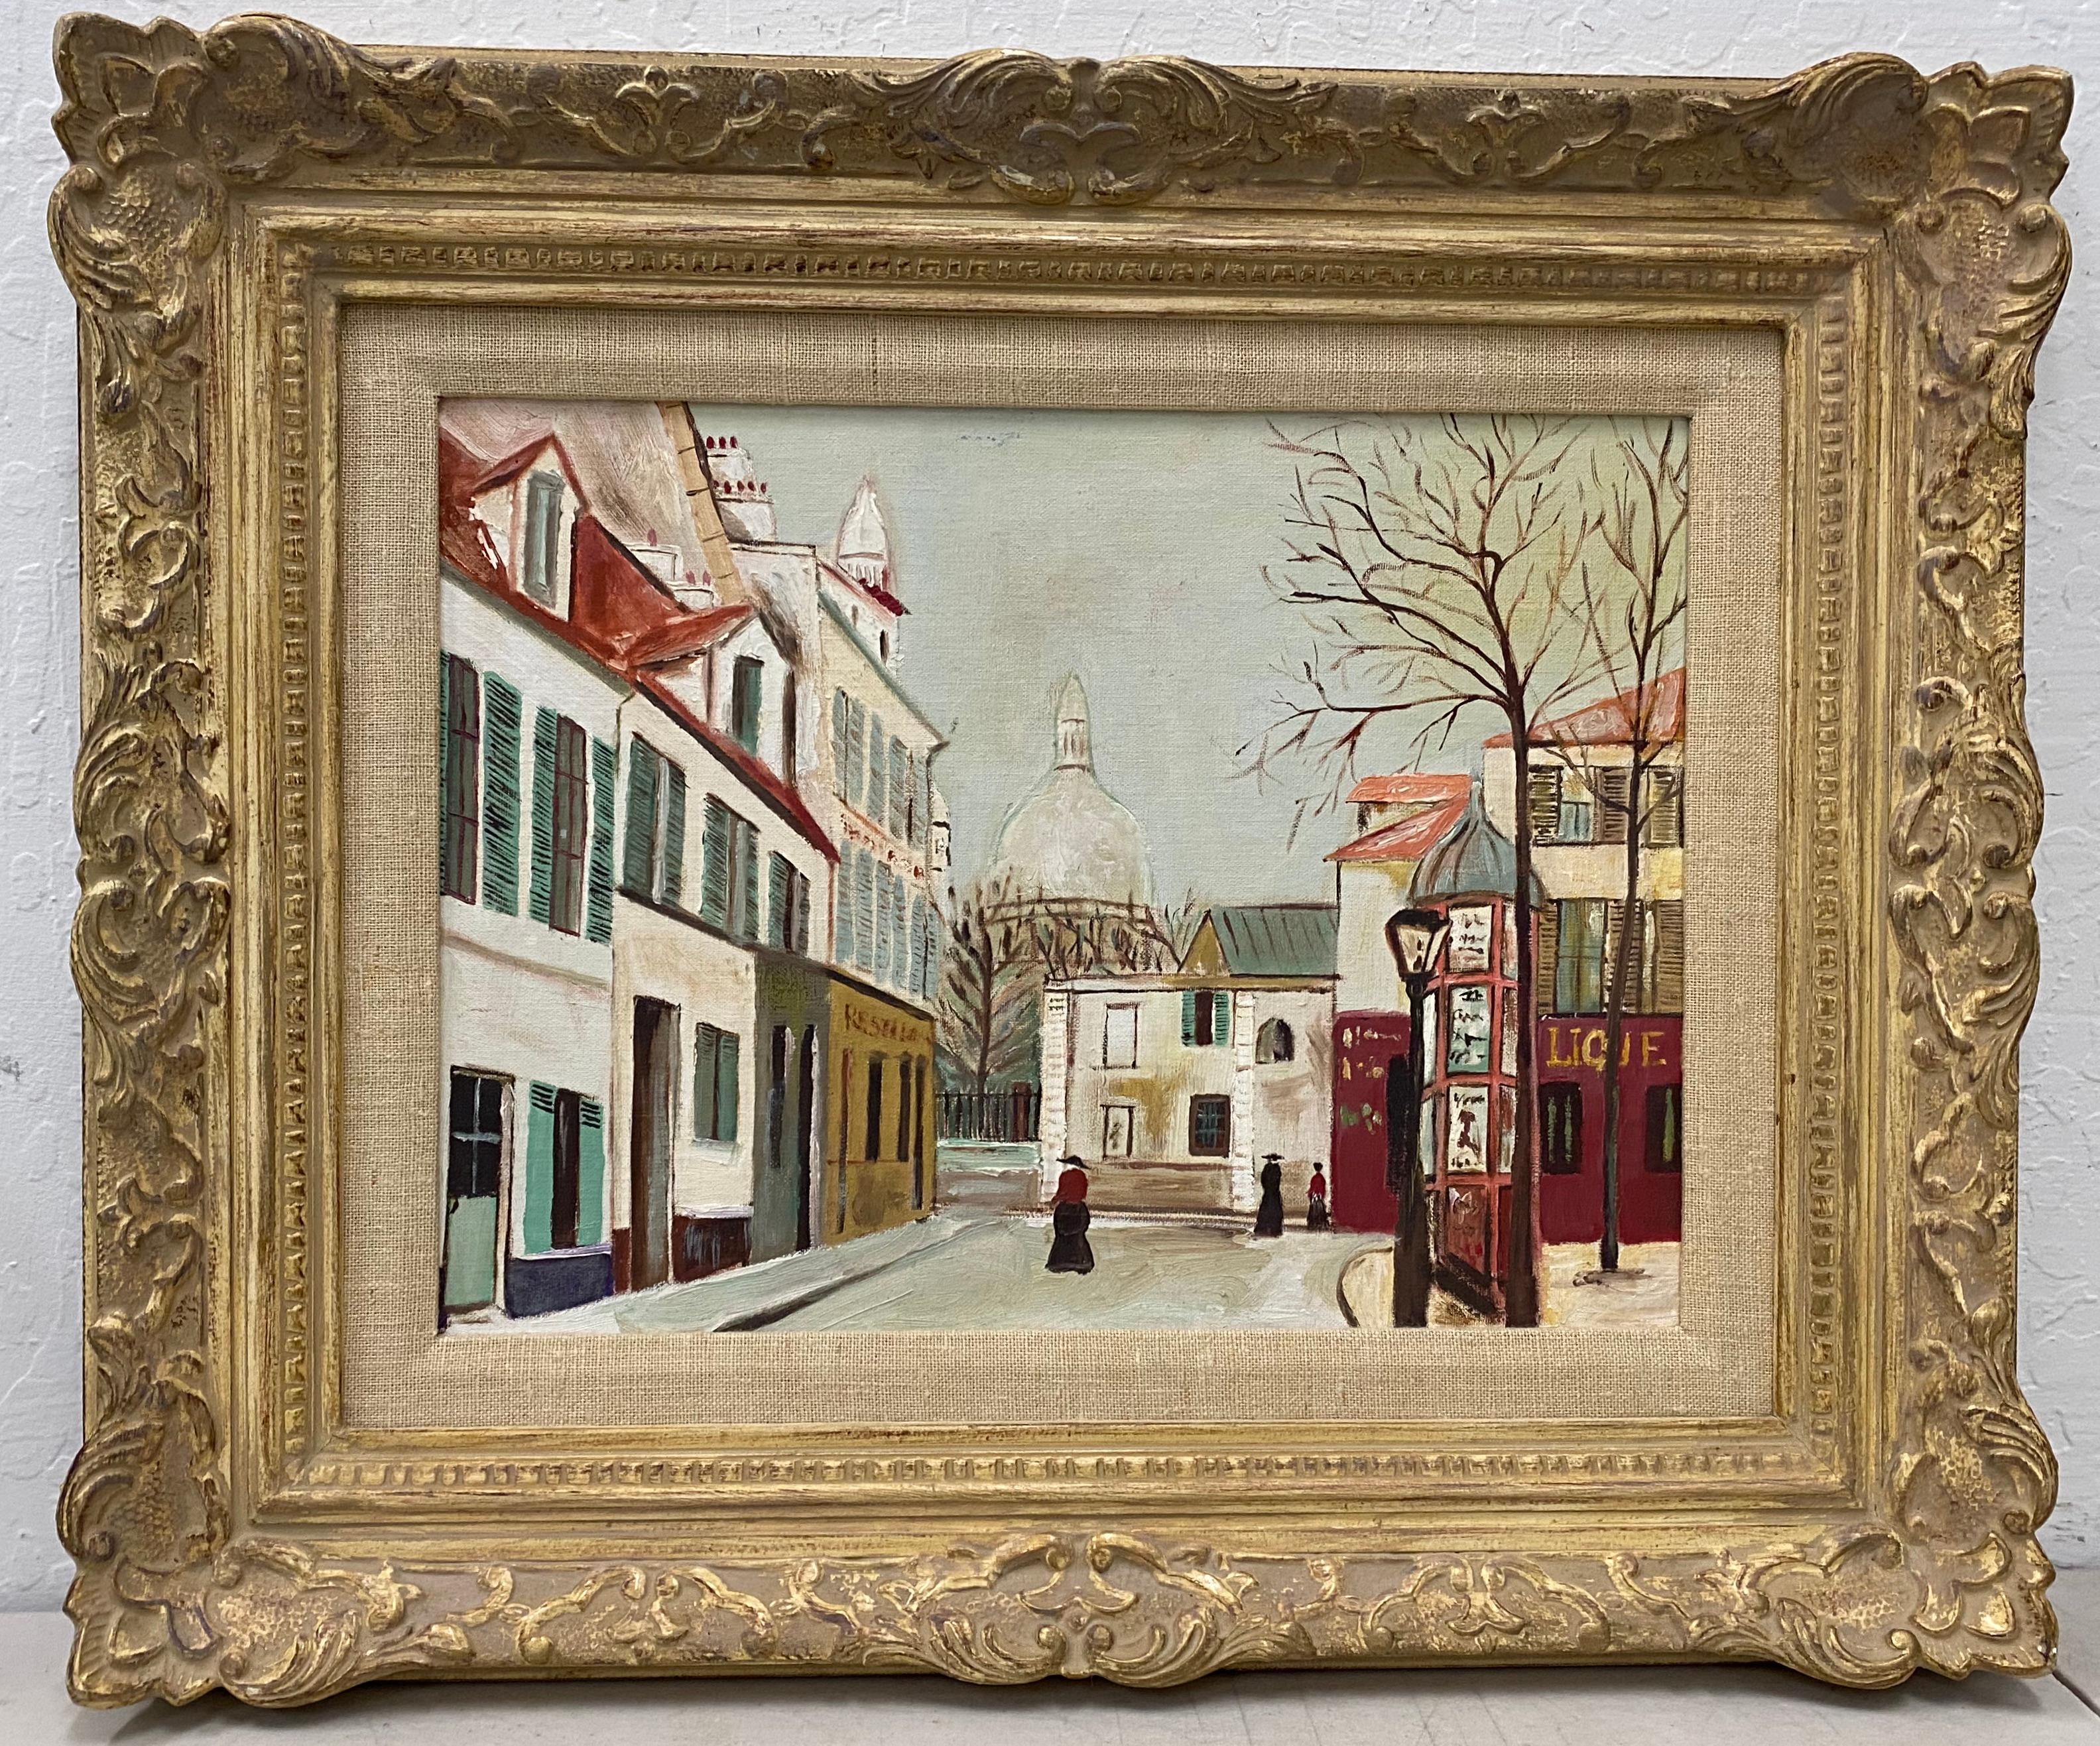 Mid Century Modern European School Painting C.1958

Original oil painting on canvas board

Dimensions 16" wide x 12" high

The frame measures 23.5" wide x 19.5" high

The notes on the back indicate the painting is by Stromberg and is done after a